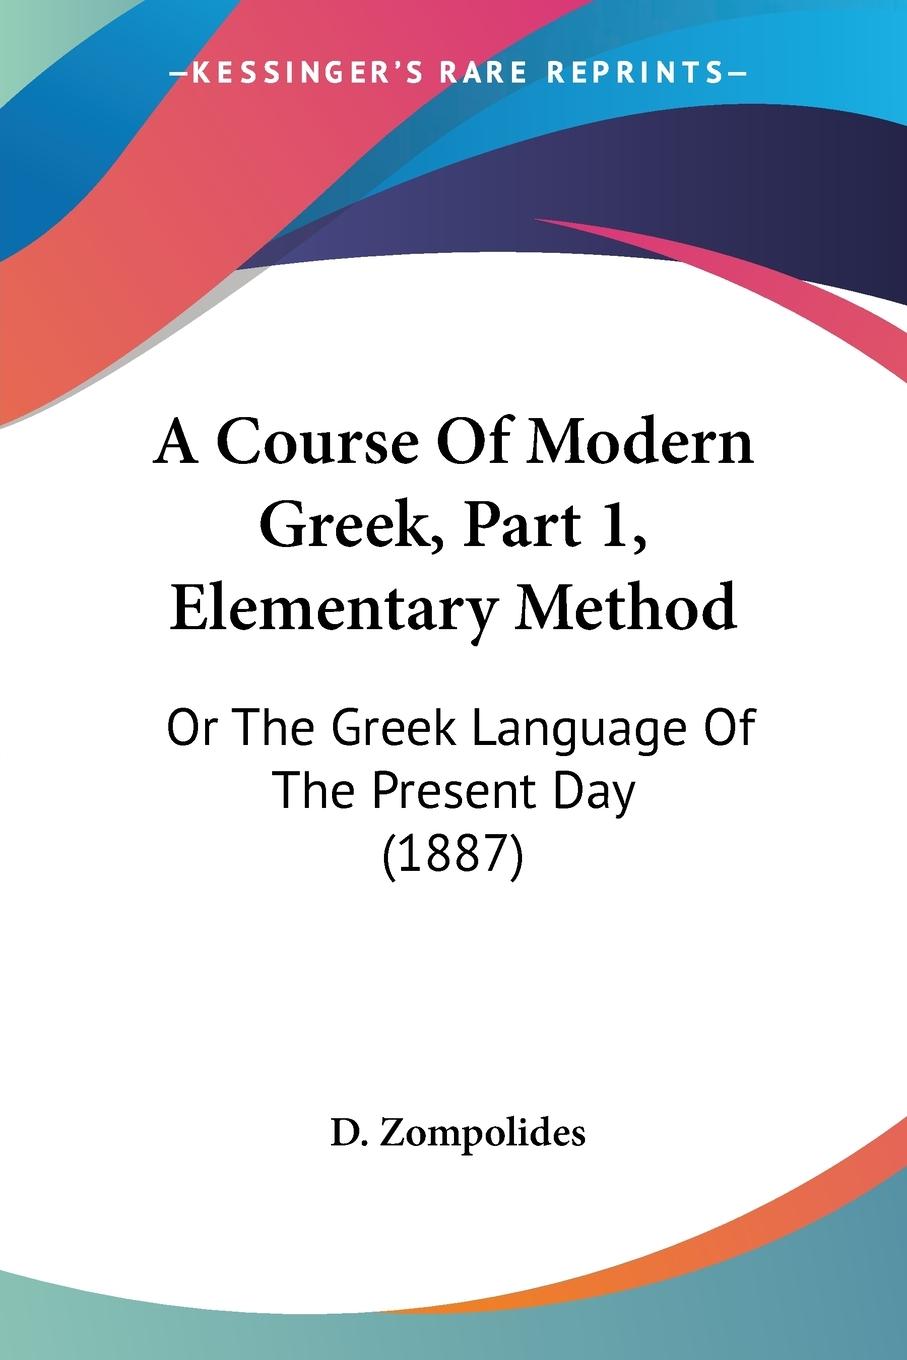 A Course Of Modern Greek, Part 1, Elementary Method - Zompolides, D.